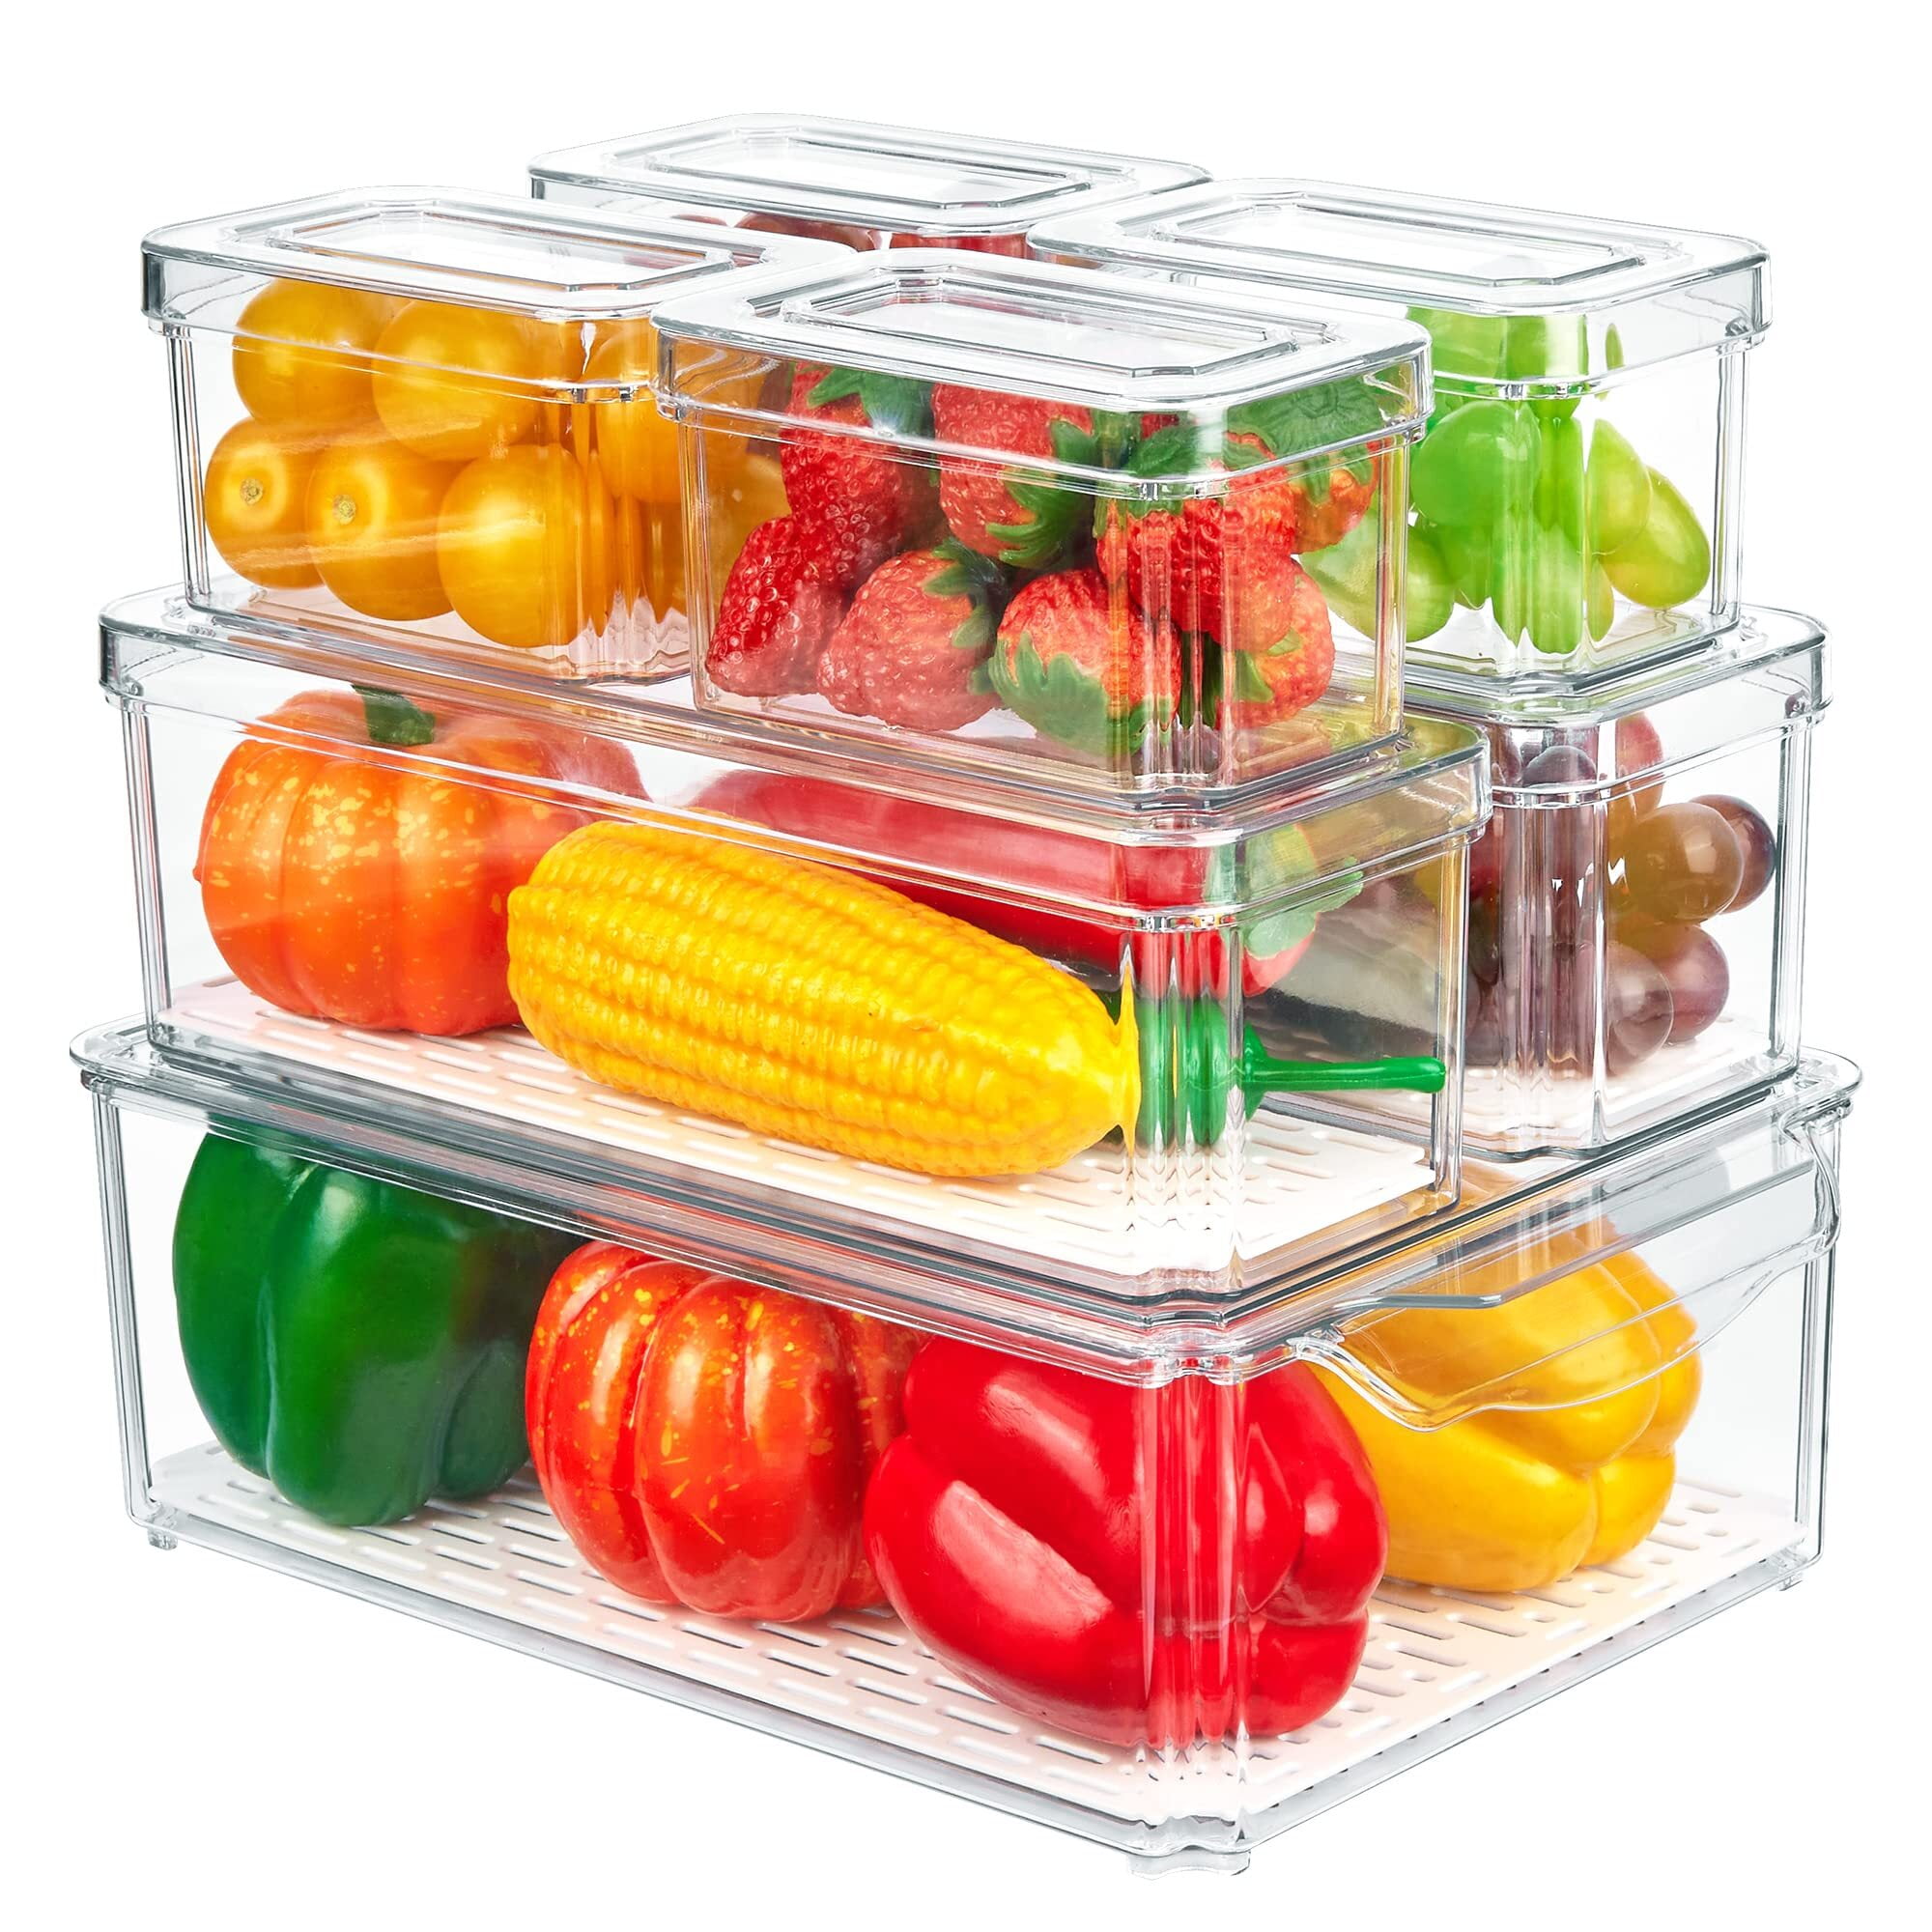 Set of 7 Refrigerator Organizer Bins, Vtopmart Fruit Containers for Fridge  with Drain Tray for Vegetables, Food, Drinks